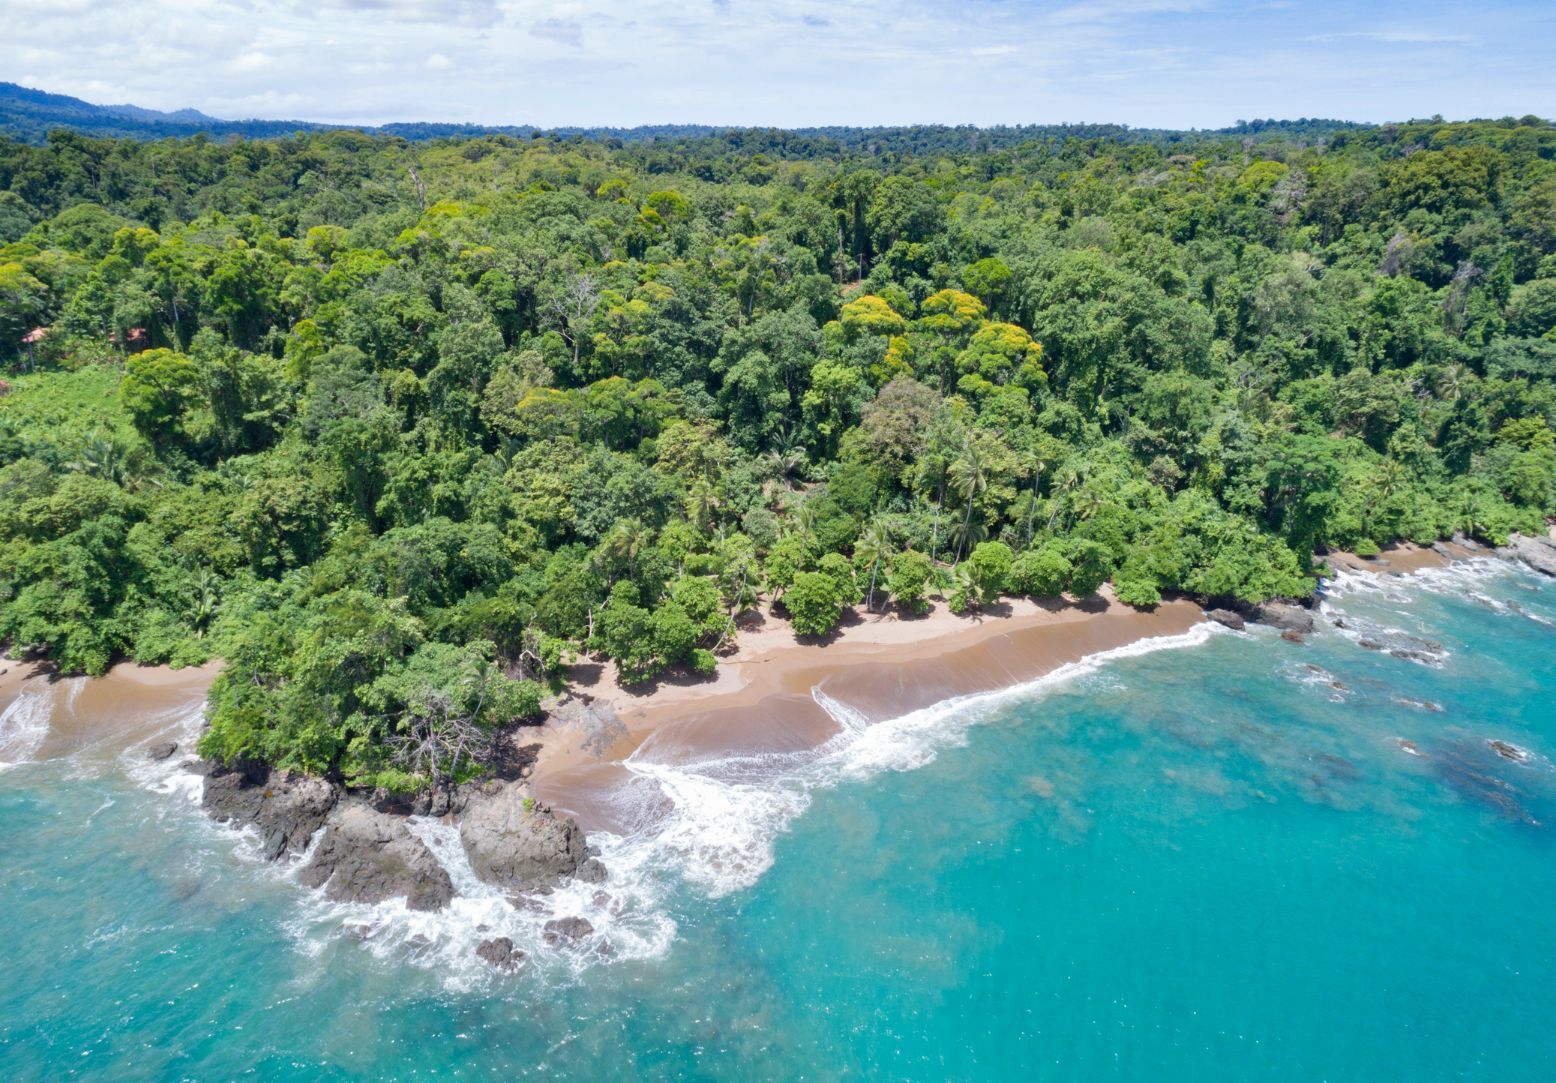 Corcovado mixes coastline with dense jungle forest, meaning a huge variety of scenery. Photo: Getty